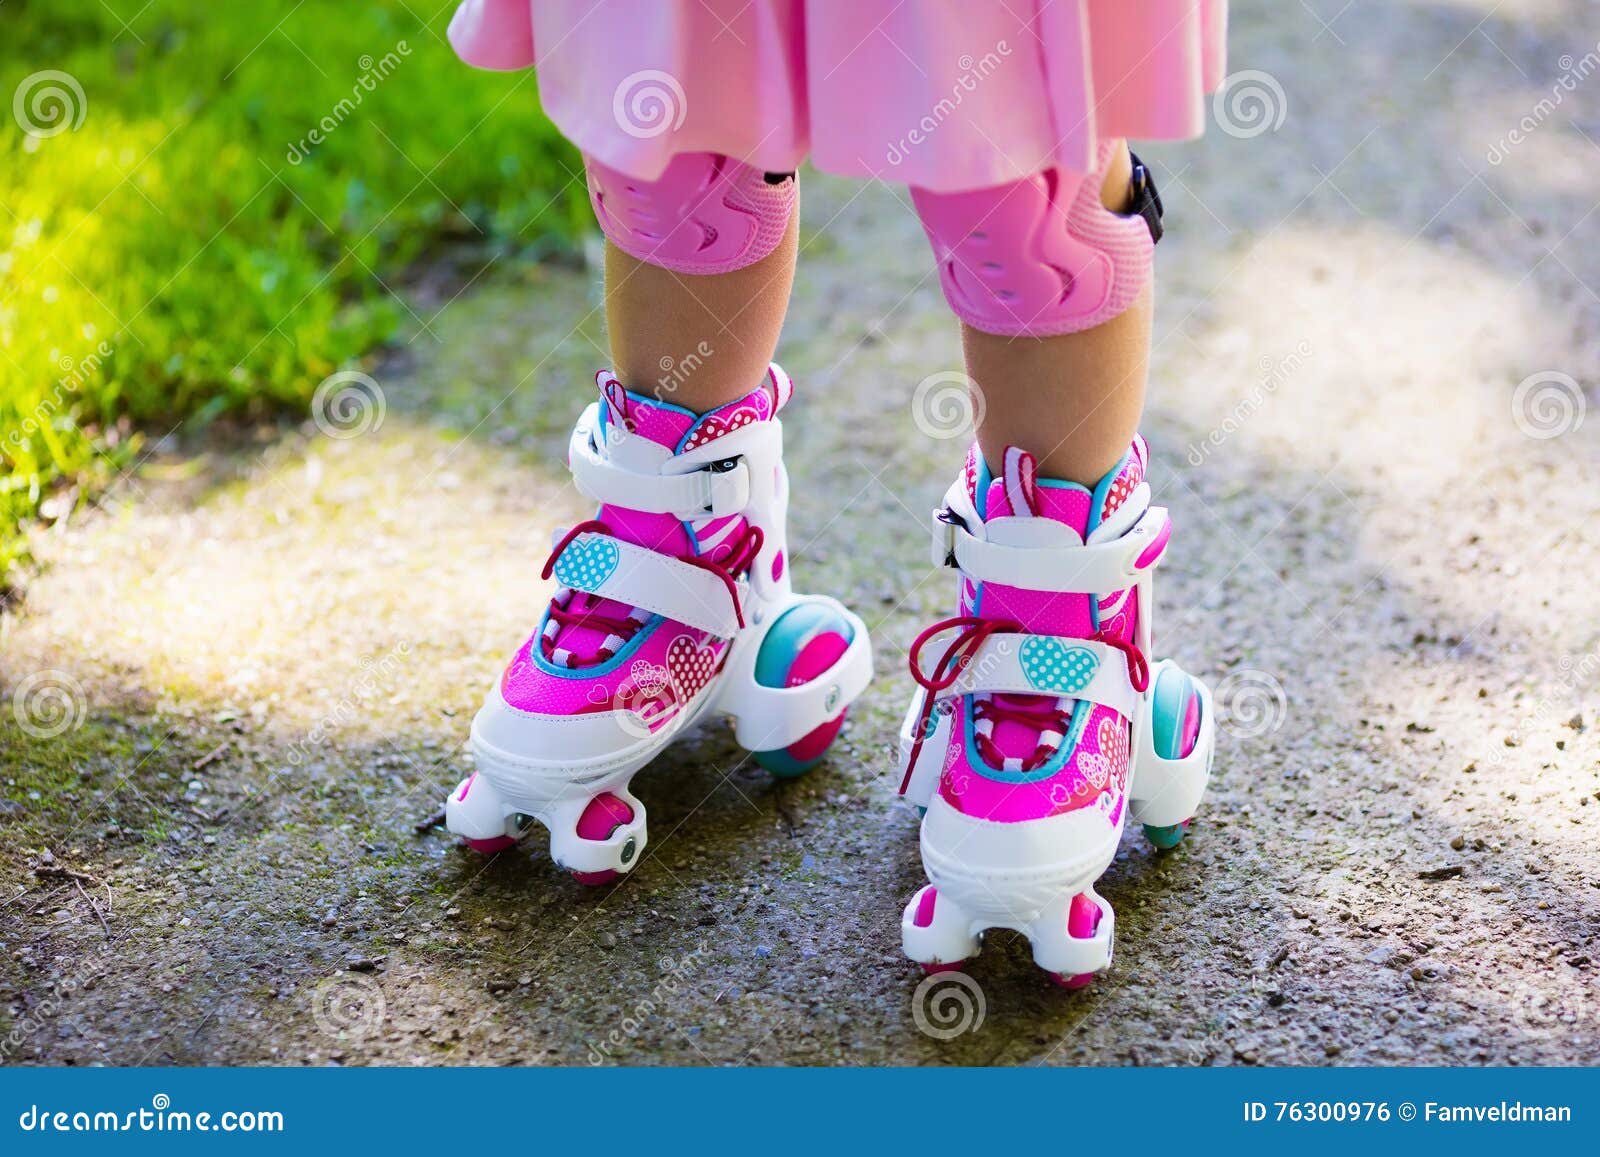 Little Girl Learning To Roller Skate In Sunny Summer Park. Child Wearing  Protection Elbow And Knee Pads, Wrist Guards And Safety Helmet For Safe  Roller Skating Ride. Active Outdoor Sport For Kids.